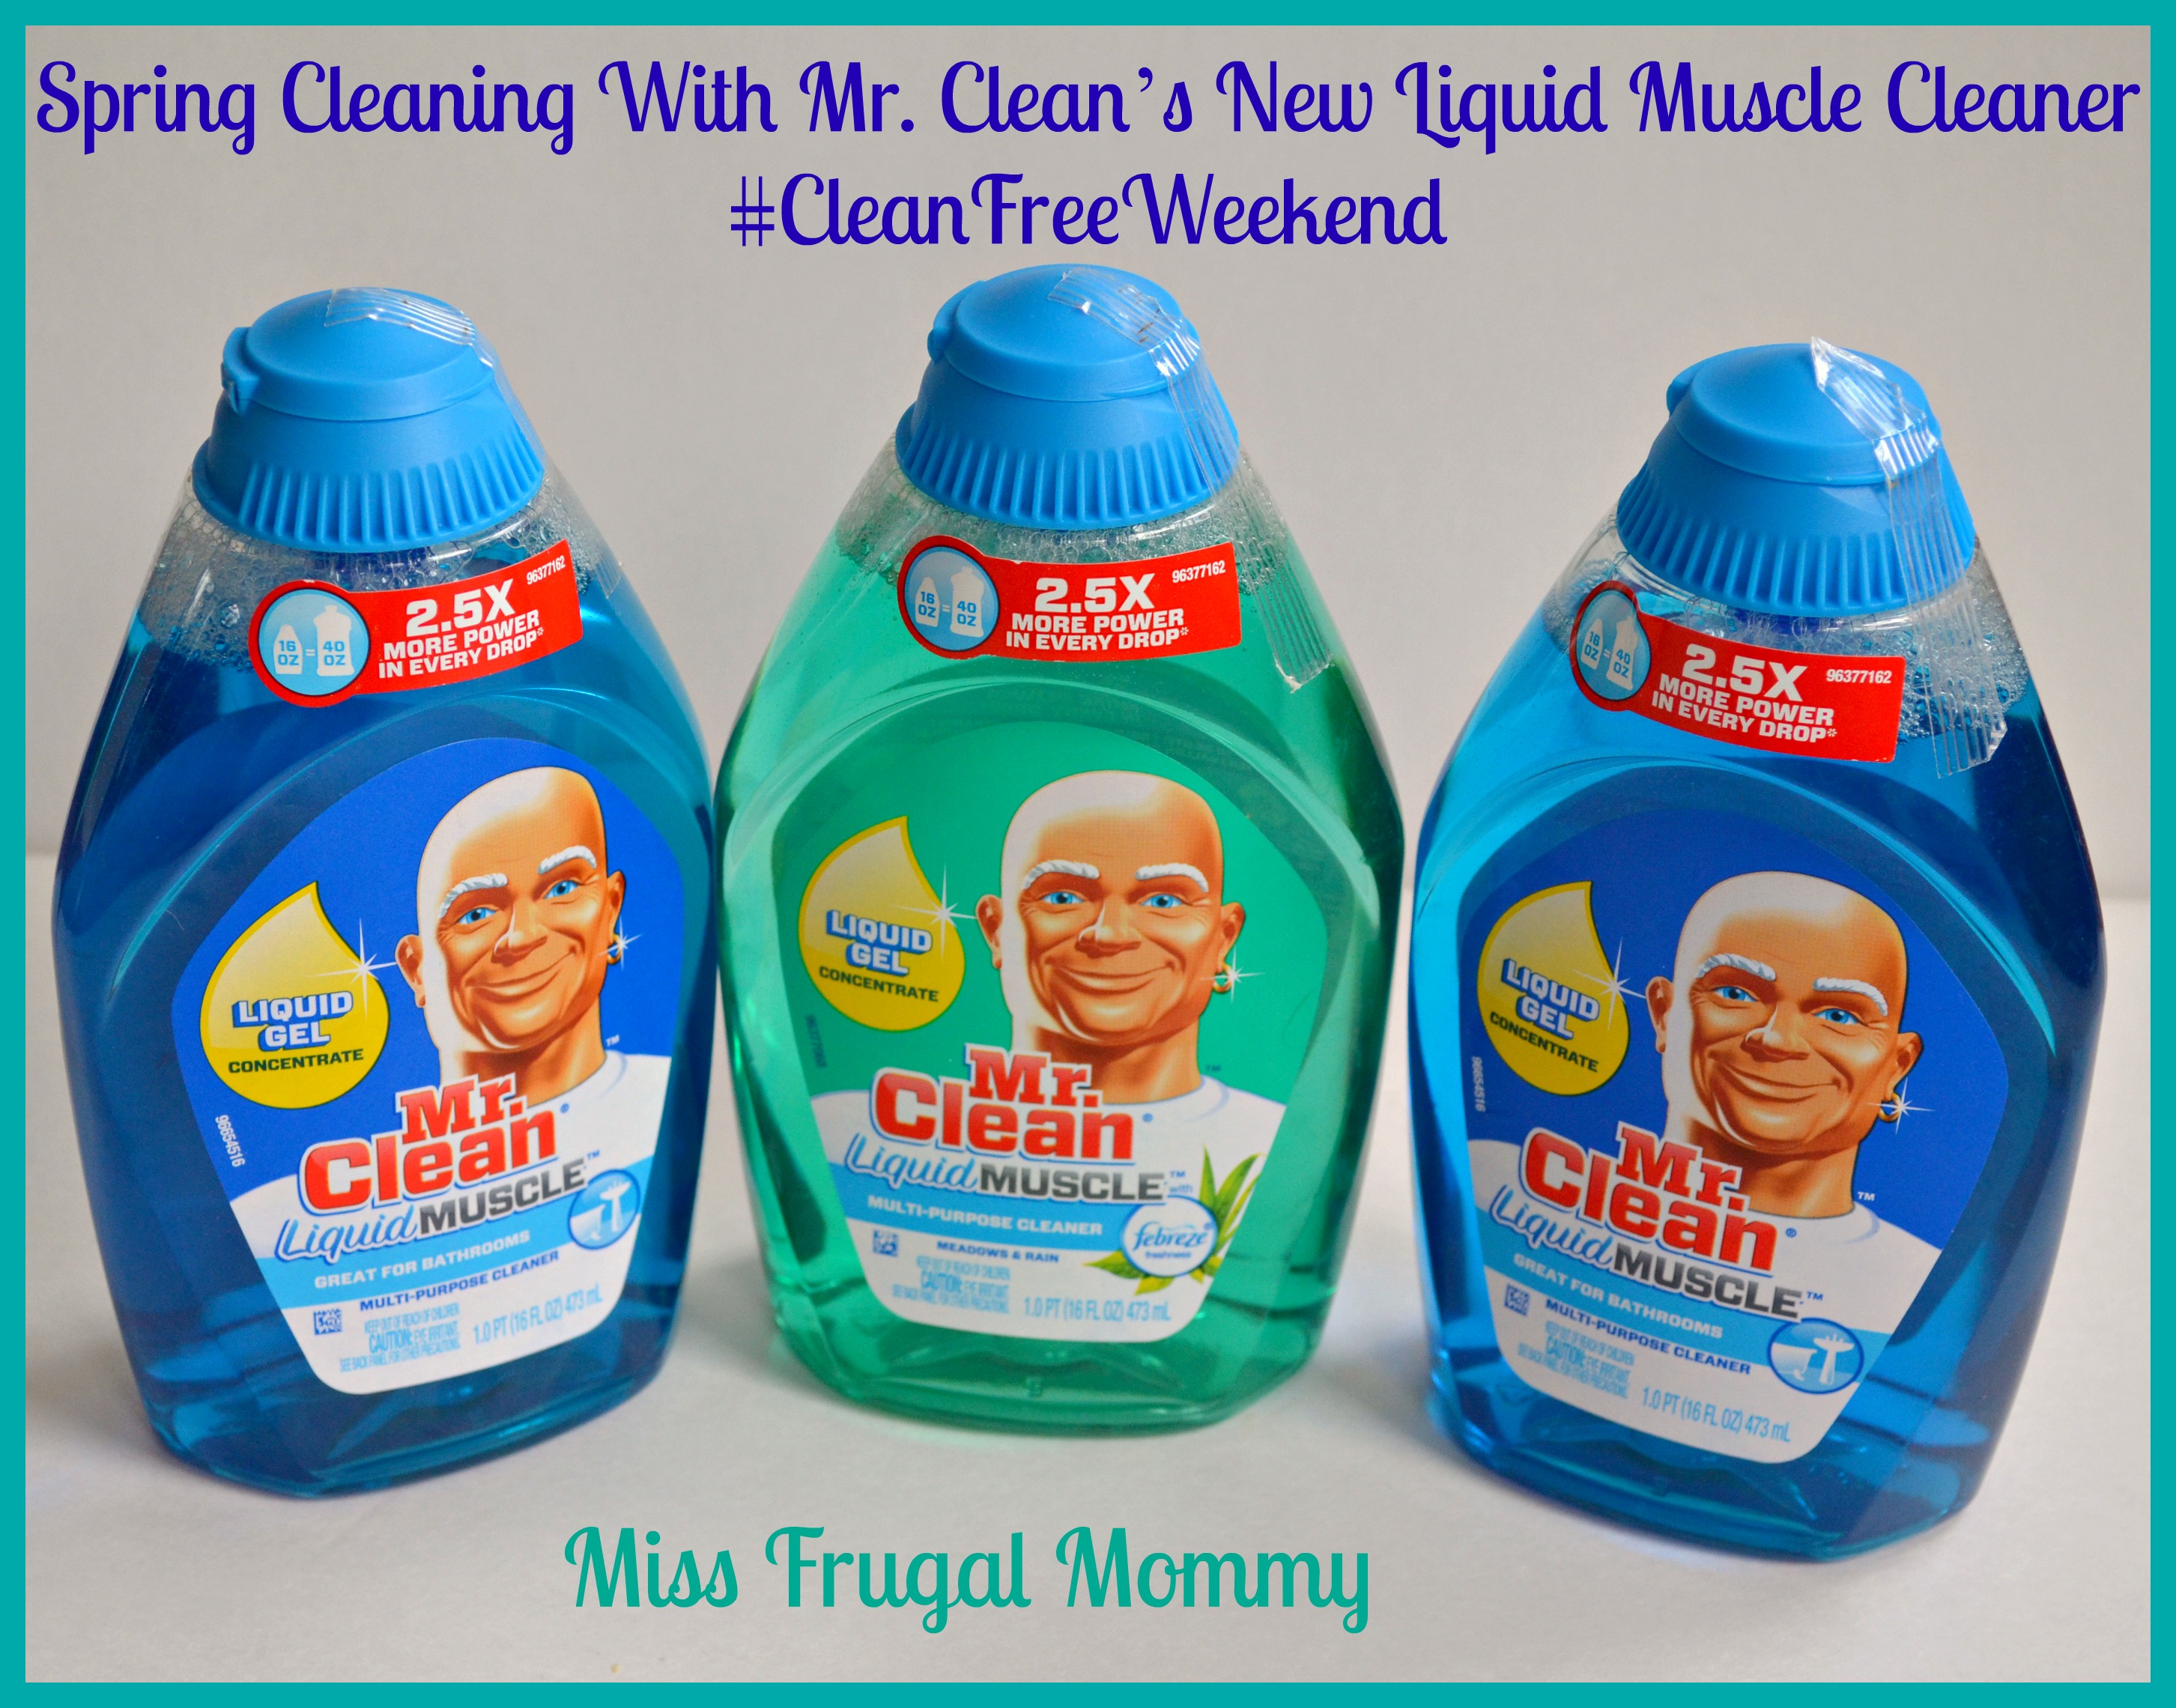 Spring Cleaning With Mr. Clean’s New Liquid Muscle Cleaner Continues